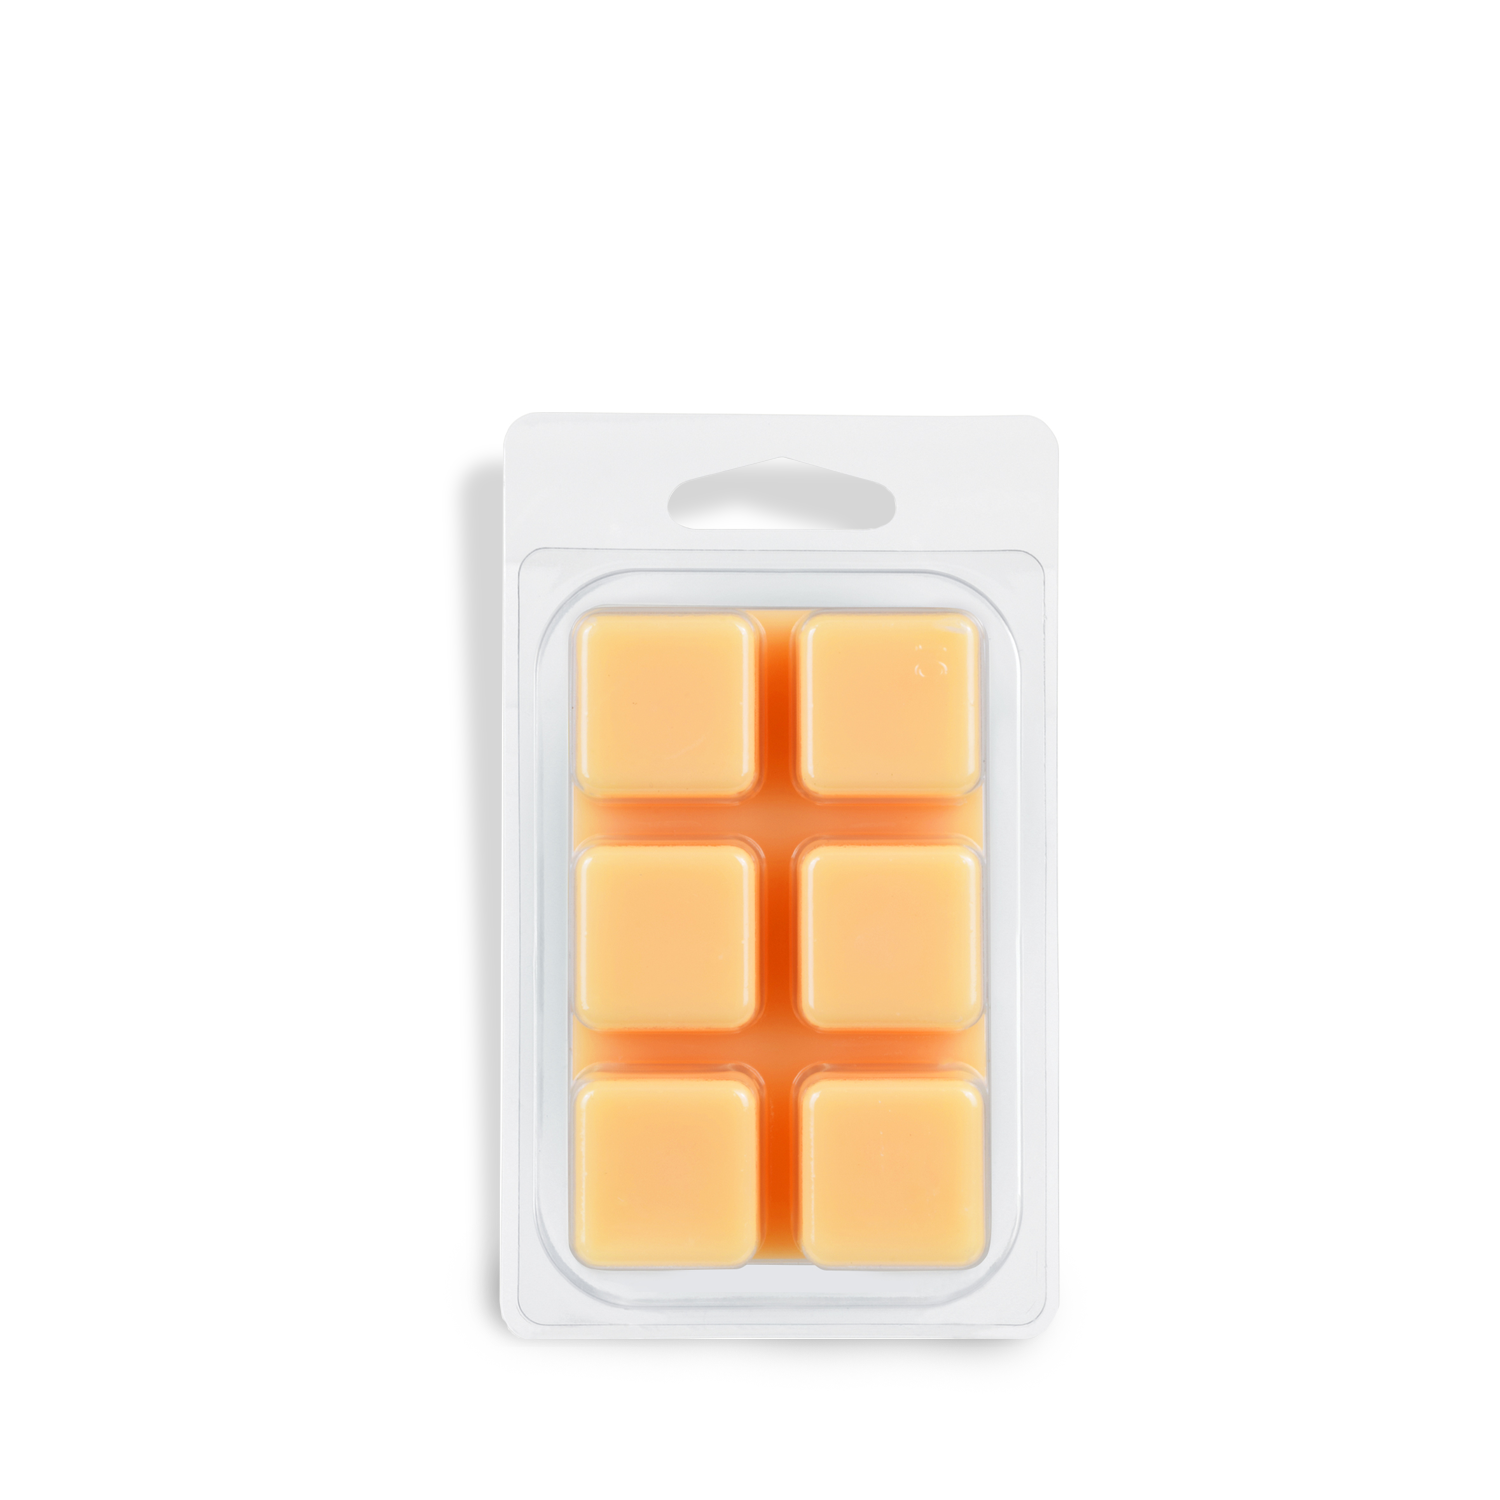 Pack of Santal Canyon scented wax melts from the Tuscany Candle® SEASONAL Collection in plastic packaging on a white background.